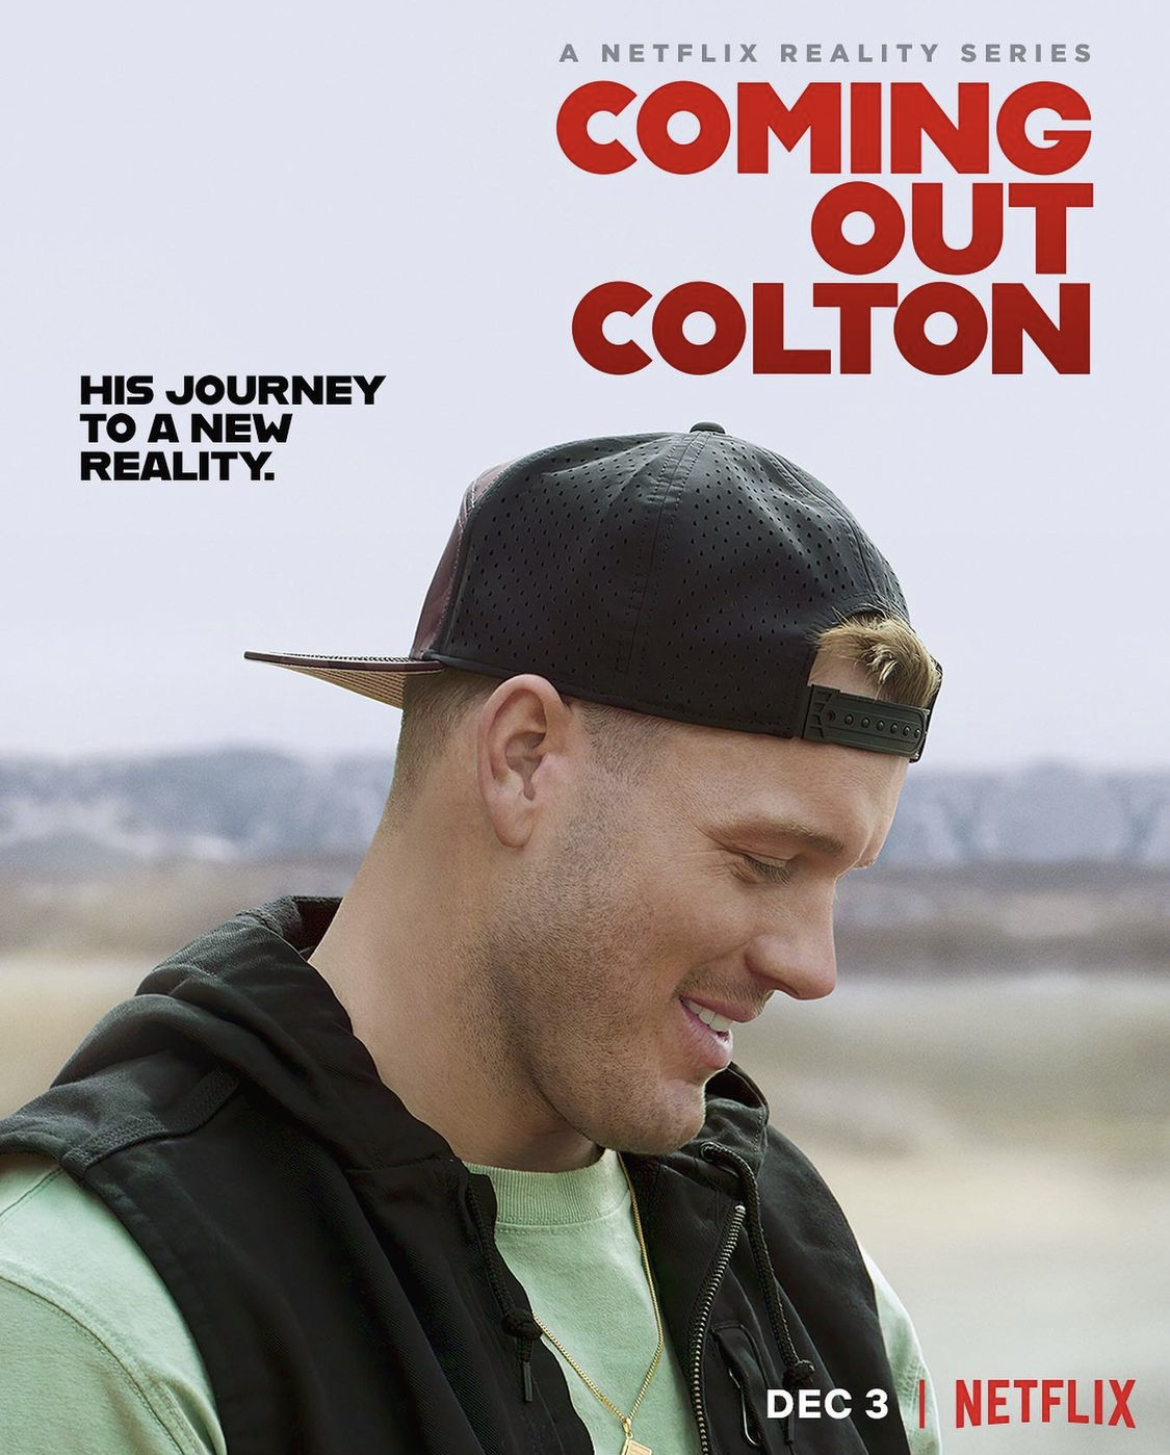 Is Coming Out Colton on Netflix